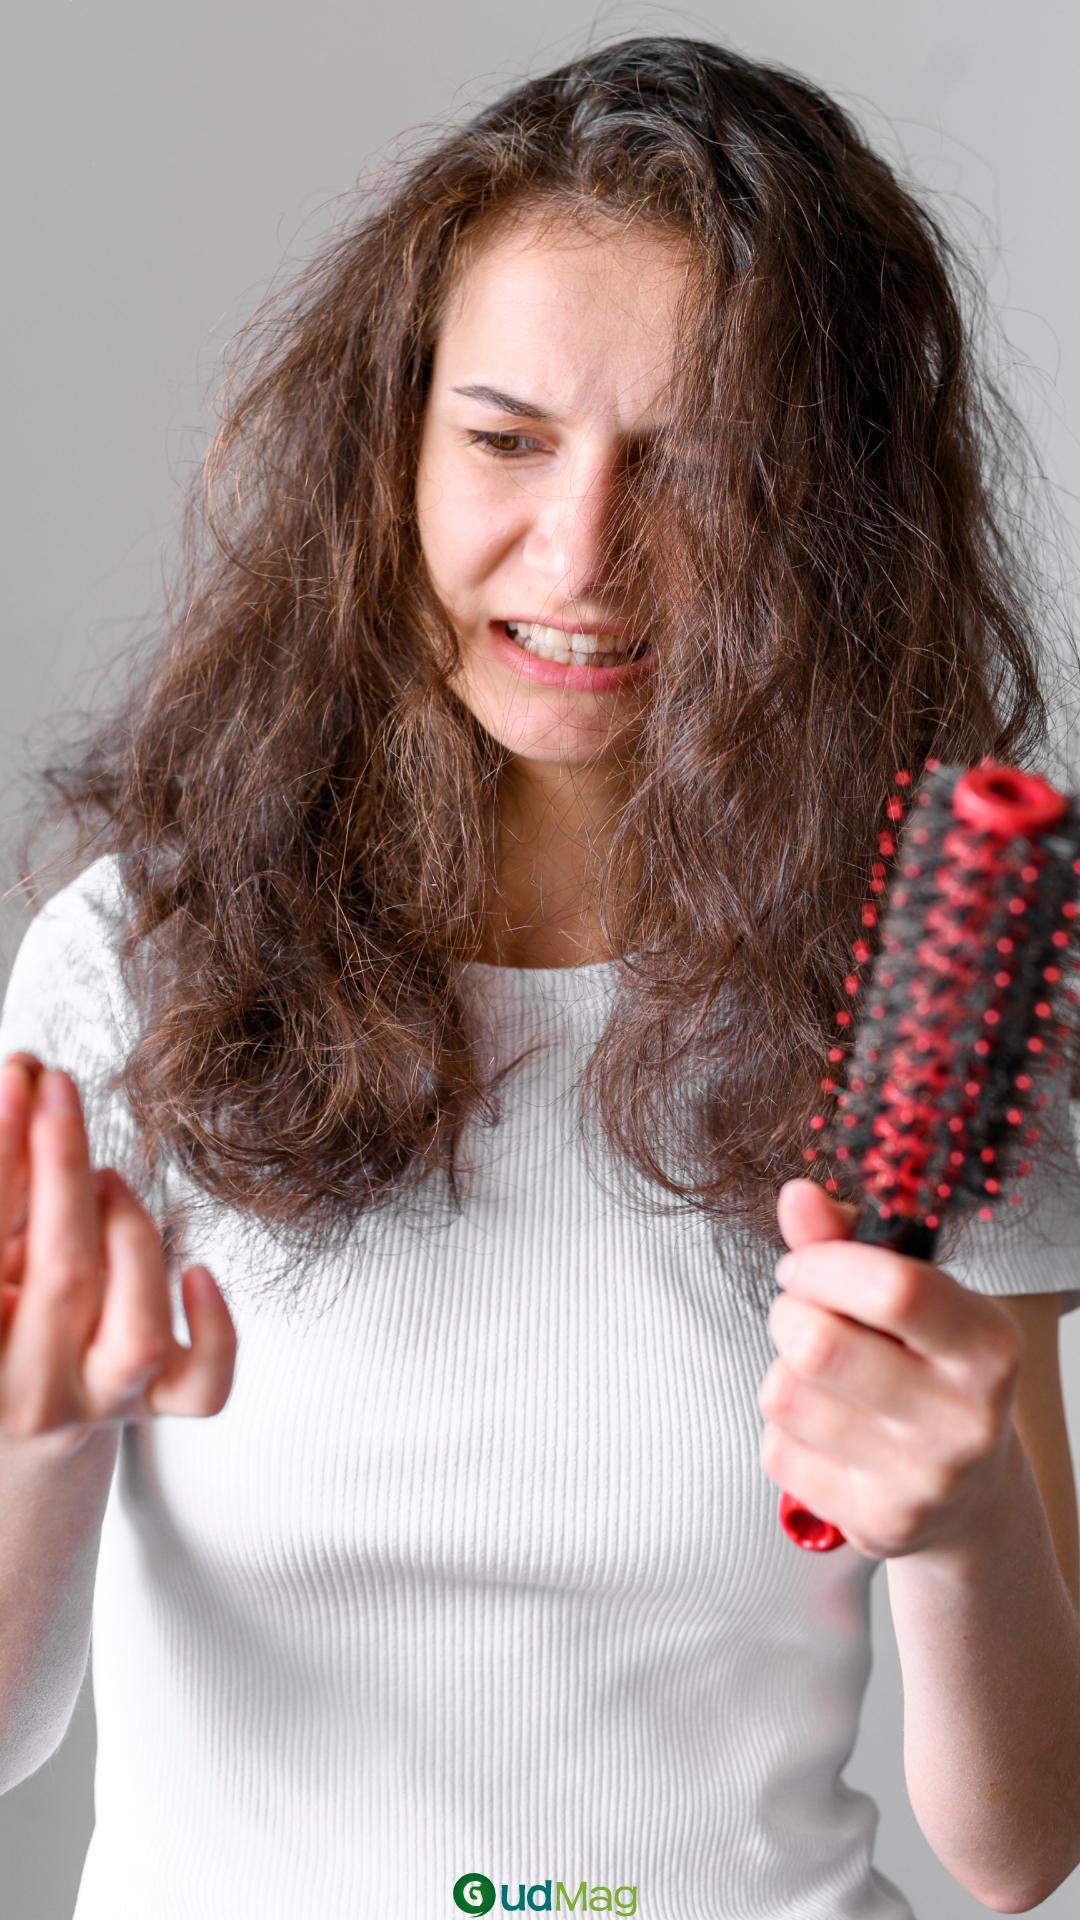 5 unhealthy eating practices causing your hair loss – GudMag